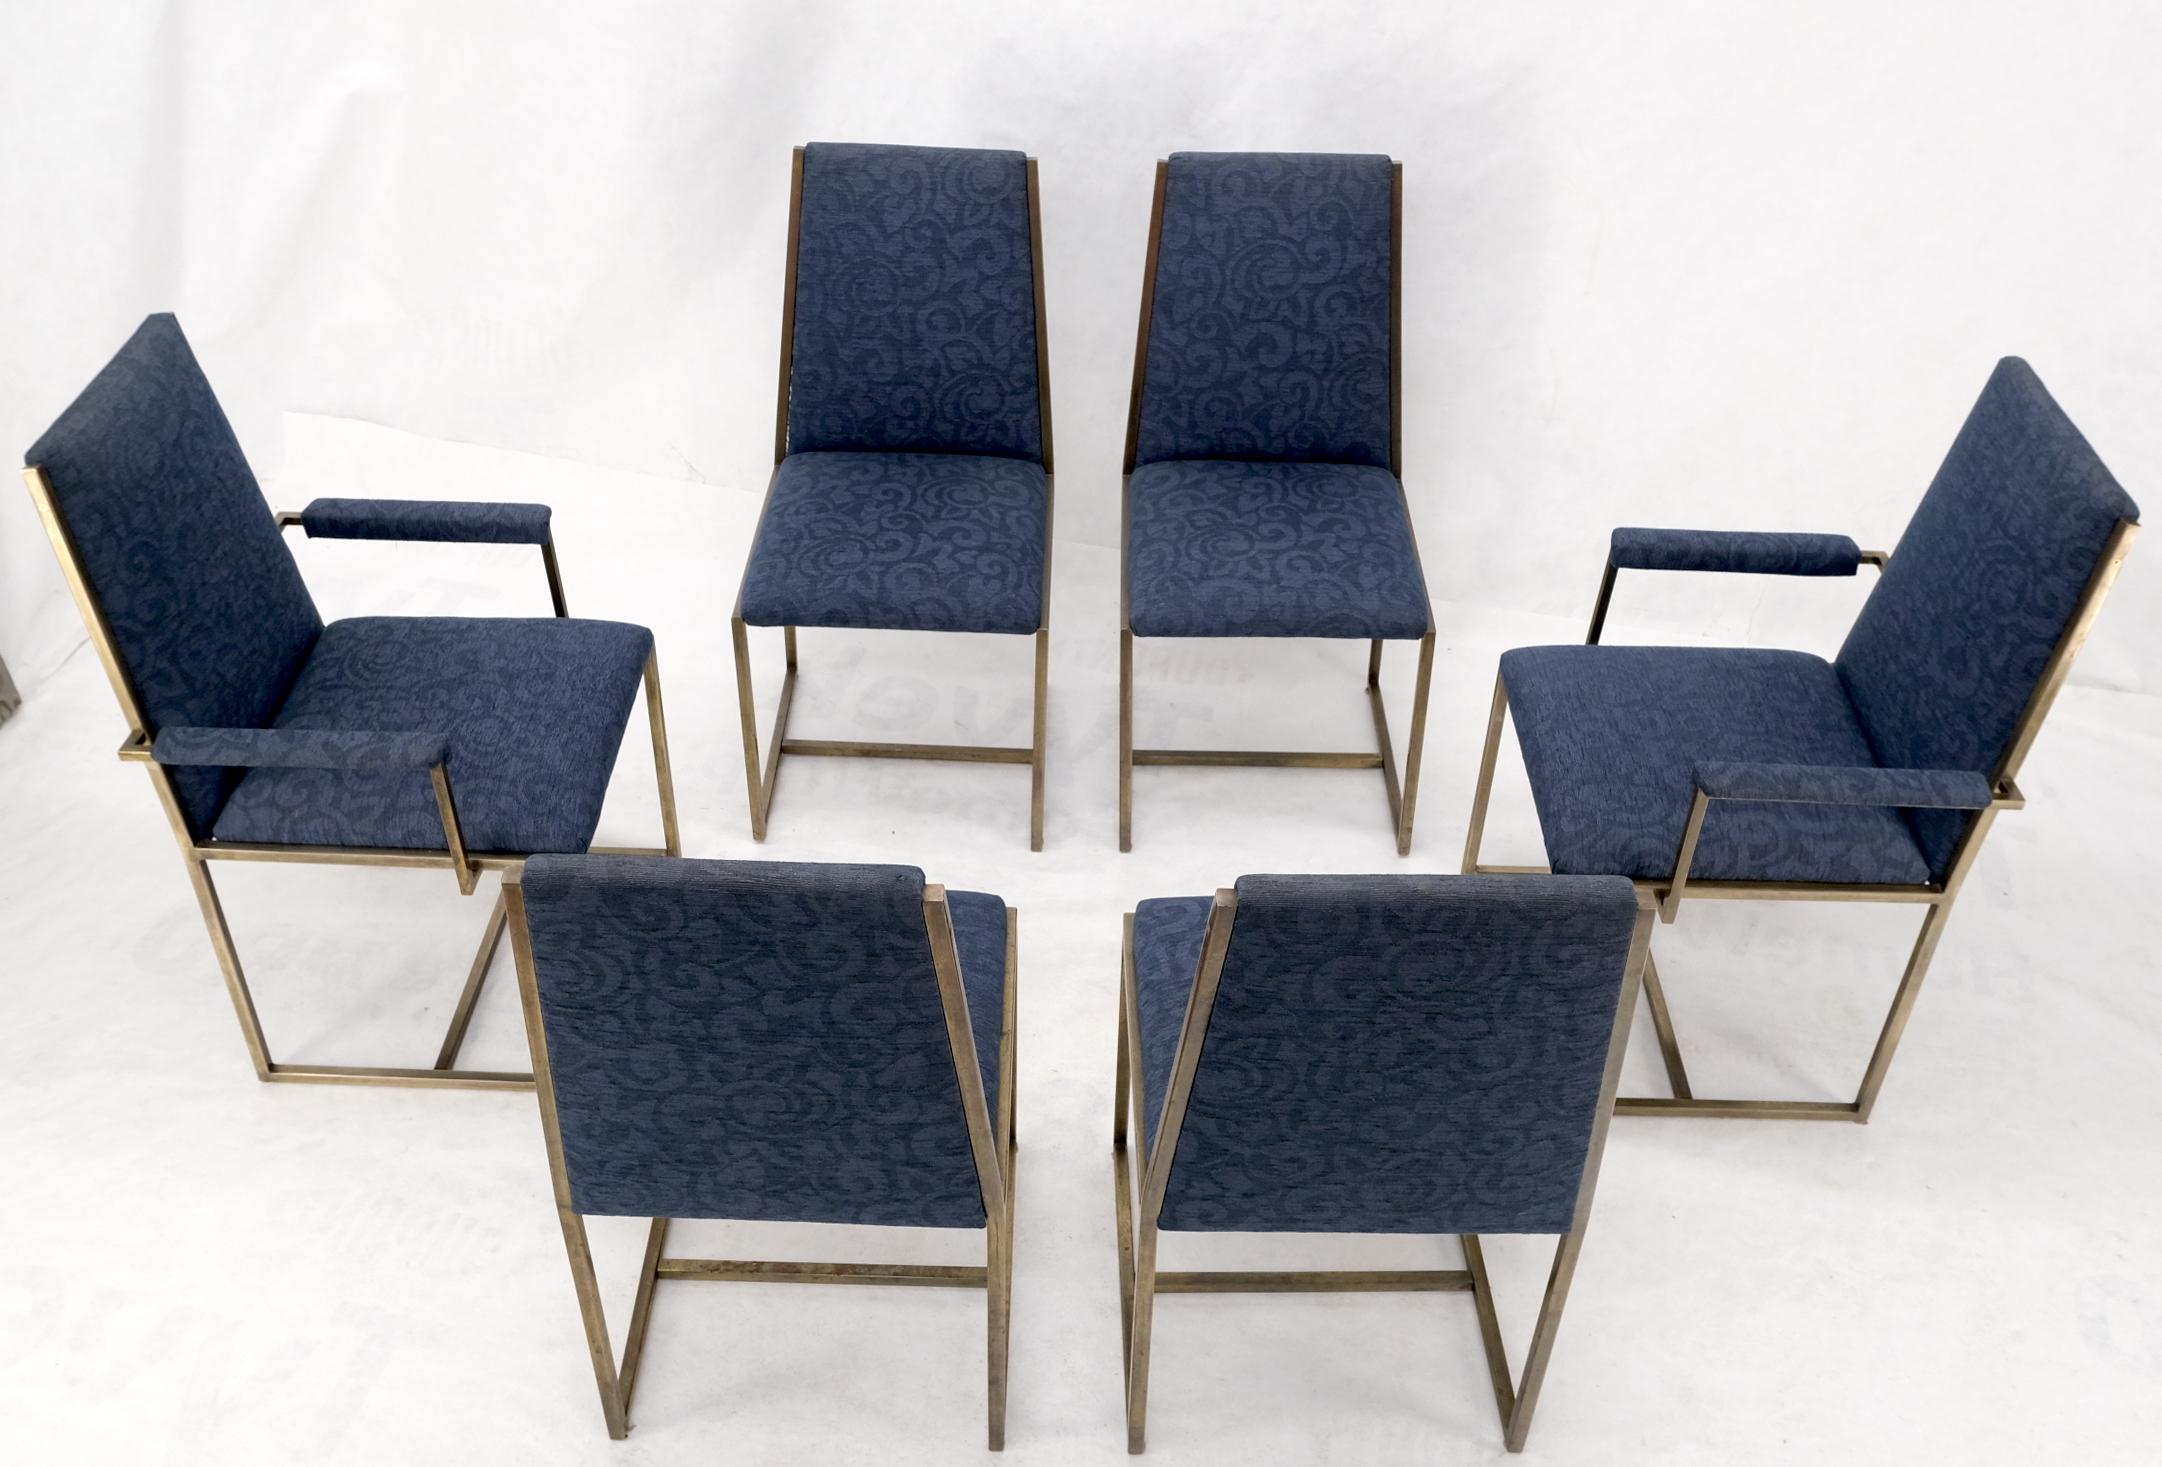 Set 6 nice bronze satin finish blue upholstery dining side arm chairs armchairs. Milo Baughman decor match.
Made in Spain.